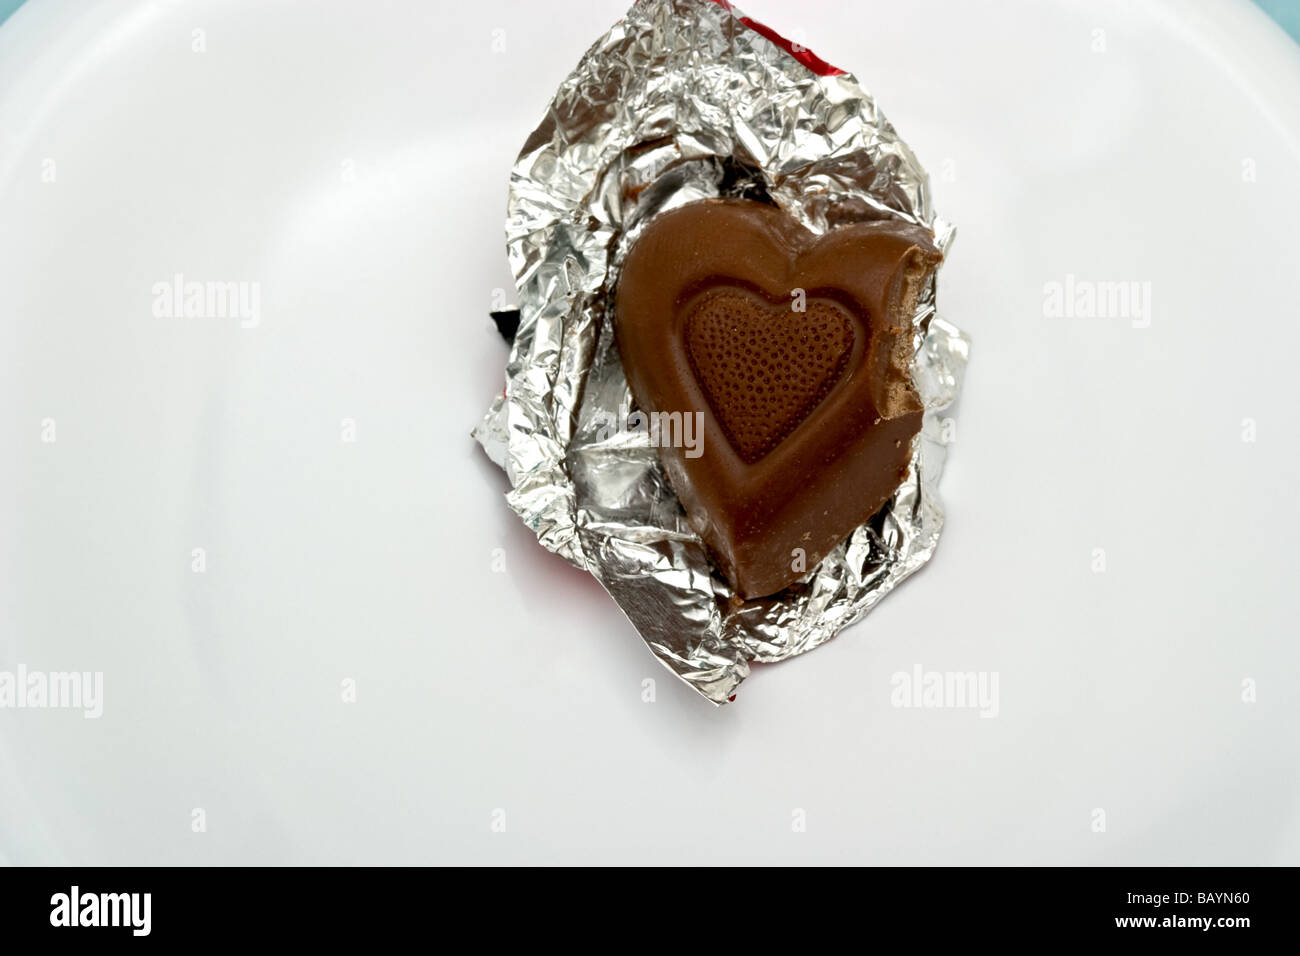 Single heart shaped chocolate candy in aluminum foil wrapping with a bite taken out of the corner on a plate Stock Photo